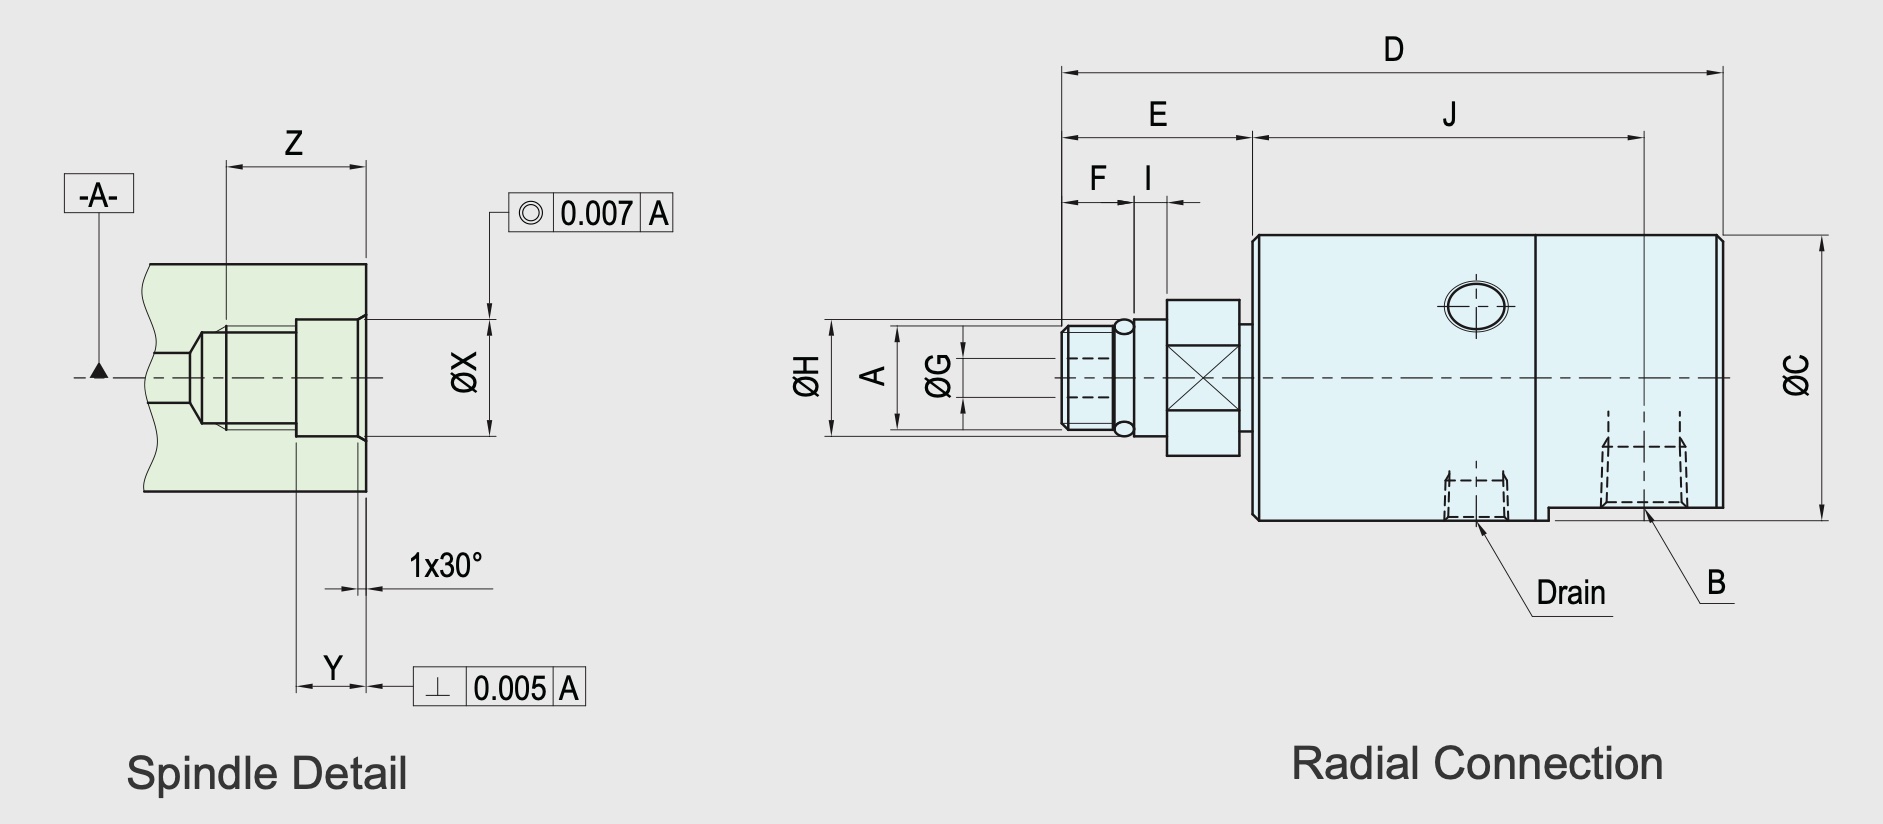 SRJ01-202-14 Technical Drawing Integrated radial type Rotating Union-Rotary Joint for Coolant and Oil